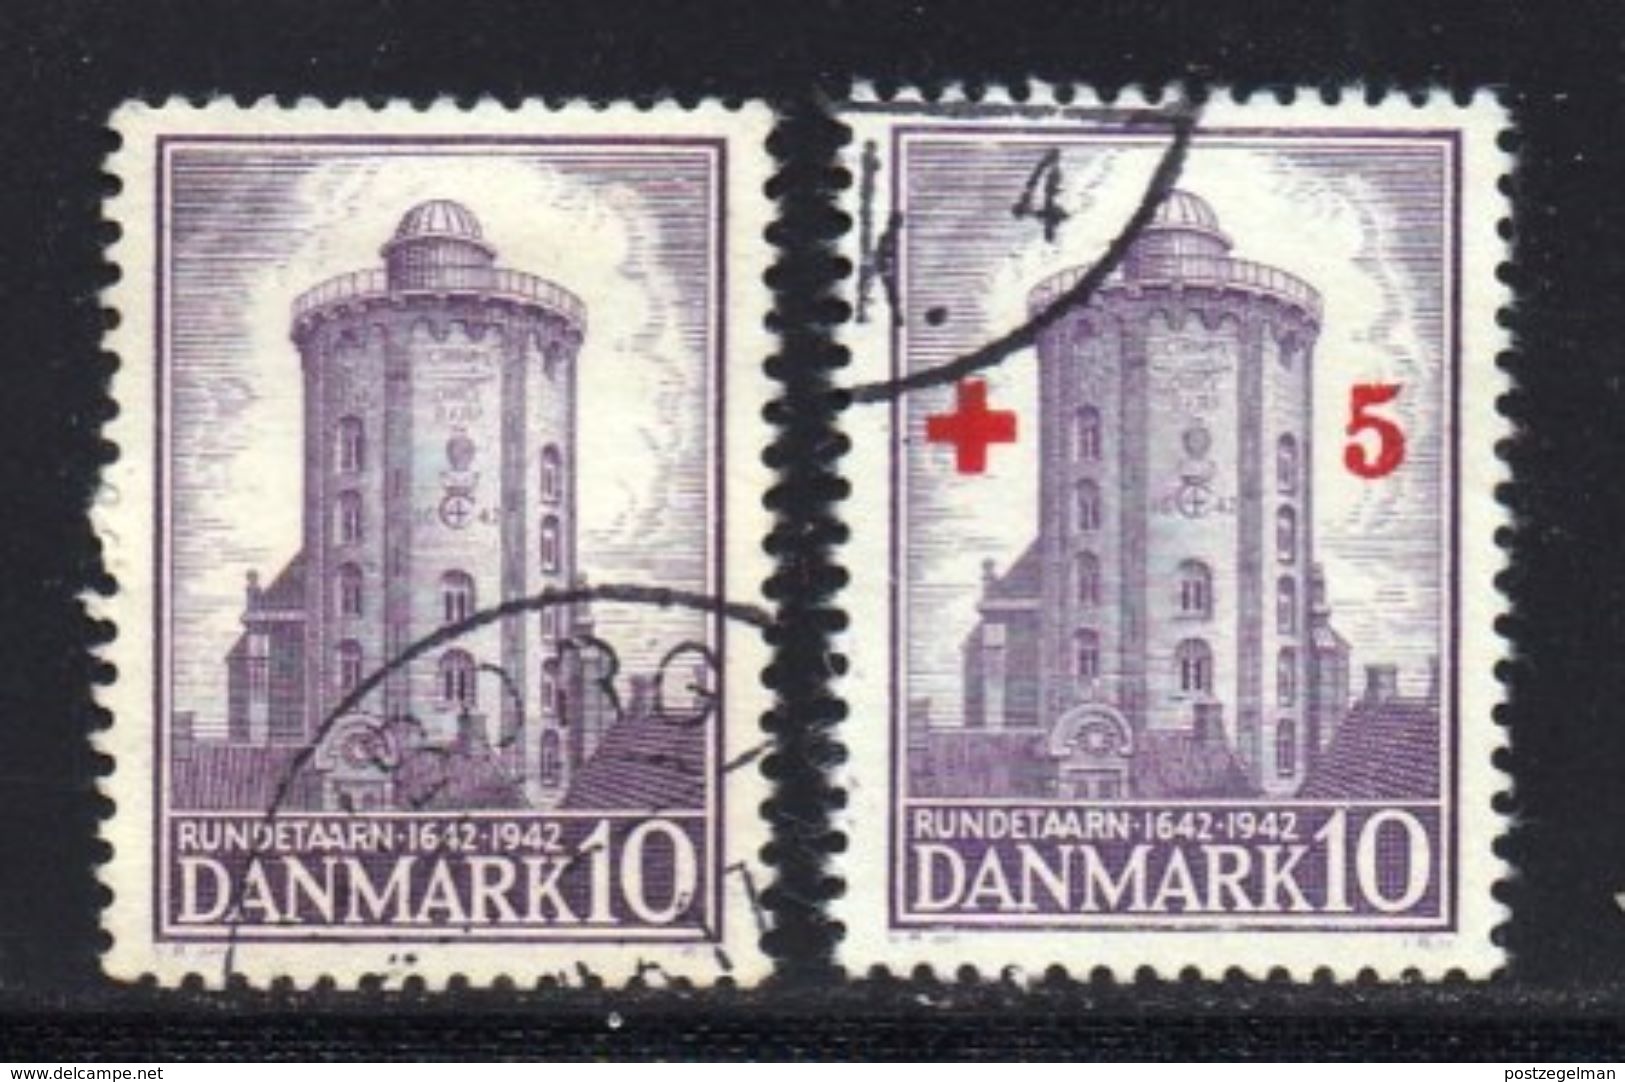 DENMARK, 1942, Used Stamp(s), Round Tower,  Mi 278+281, #10050, - Used Stamps